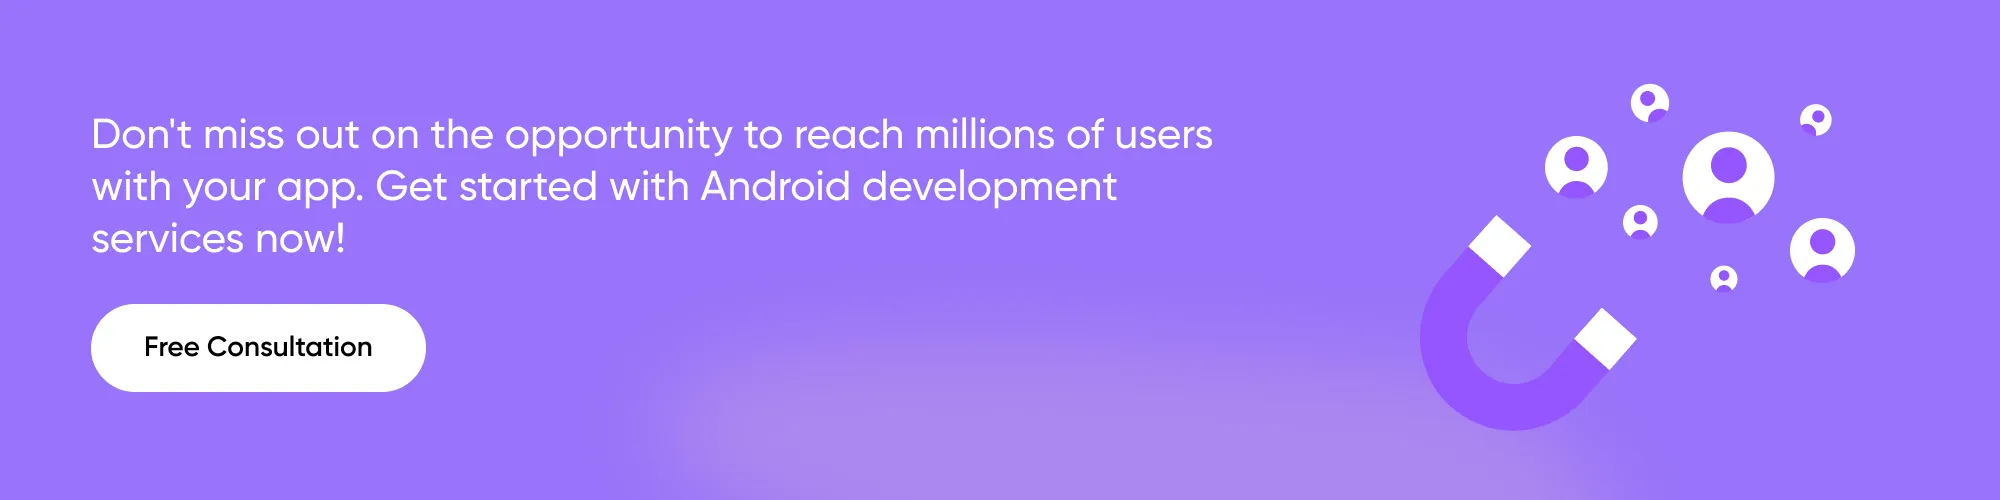 CTA_ Don't miss out on the opportunity to reach millions of users with your app. Get started with Android development services now!